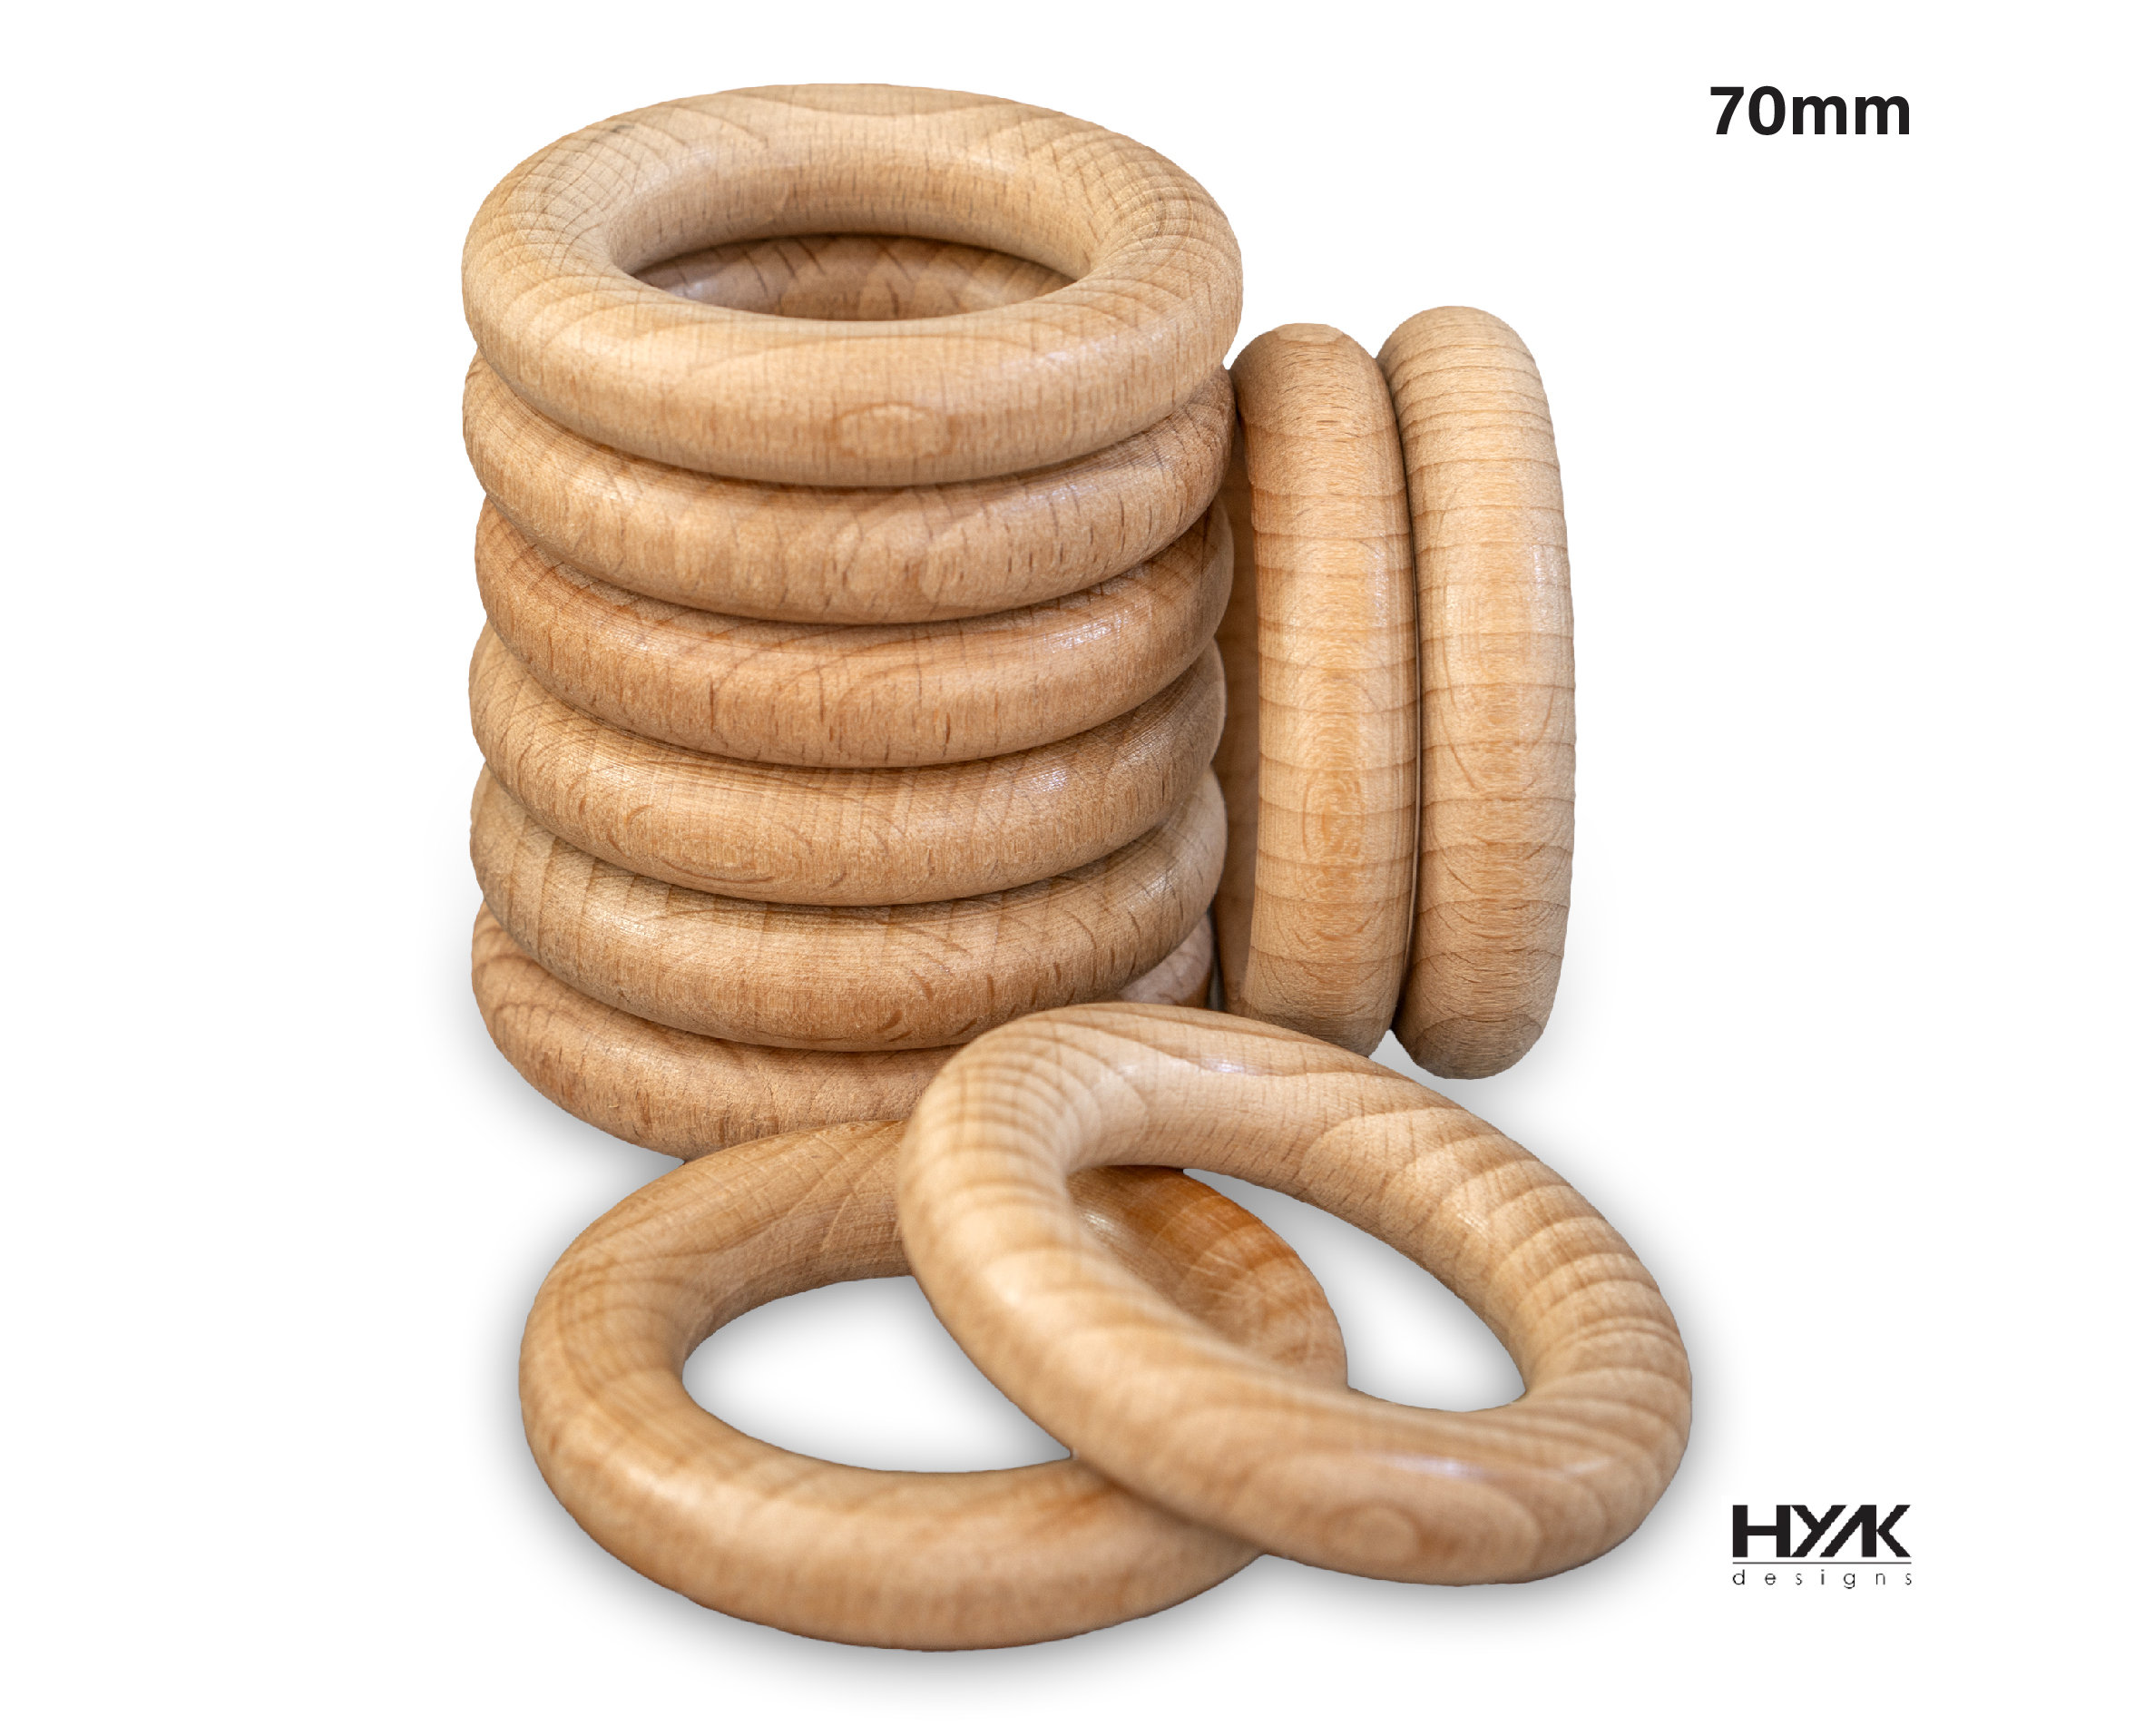 10 Small Wooden Rings for Play Gym and Toys, Macrame Hanger, 48mm Wooden  Ring, Sustainable Organic Wood Rings for Crafts, Rattles 